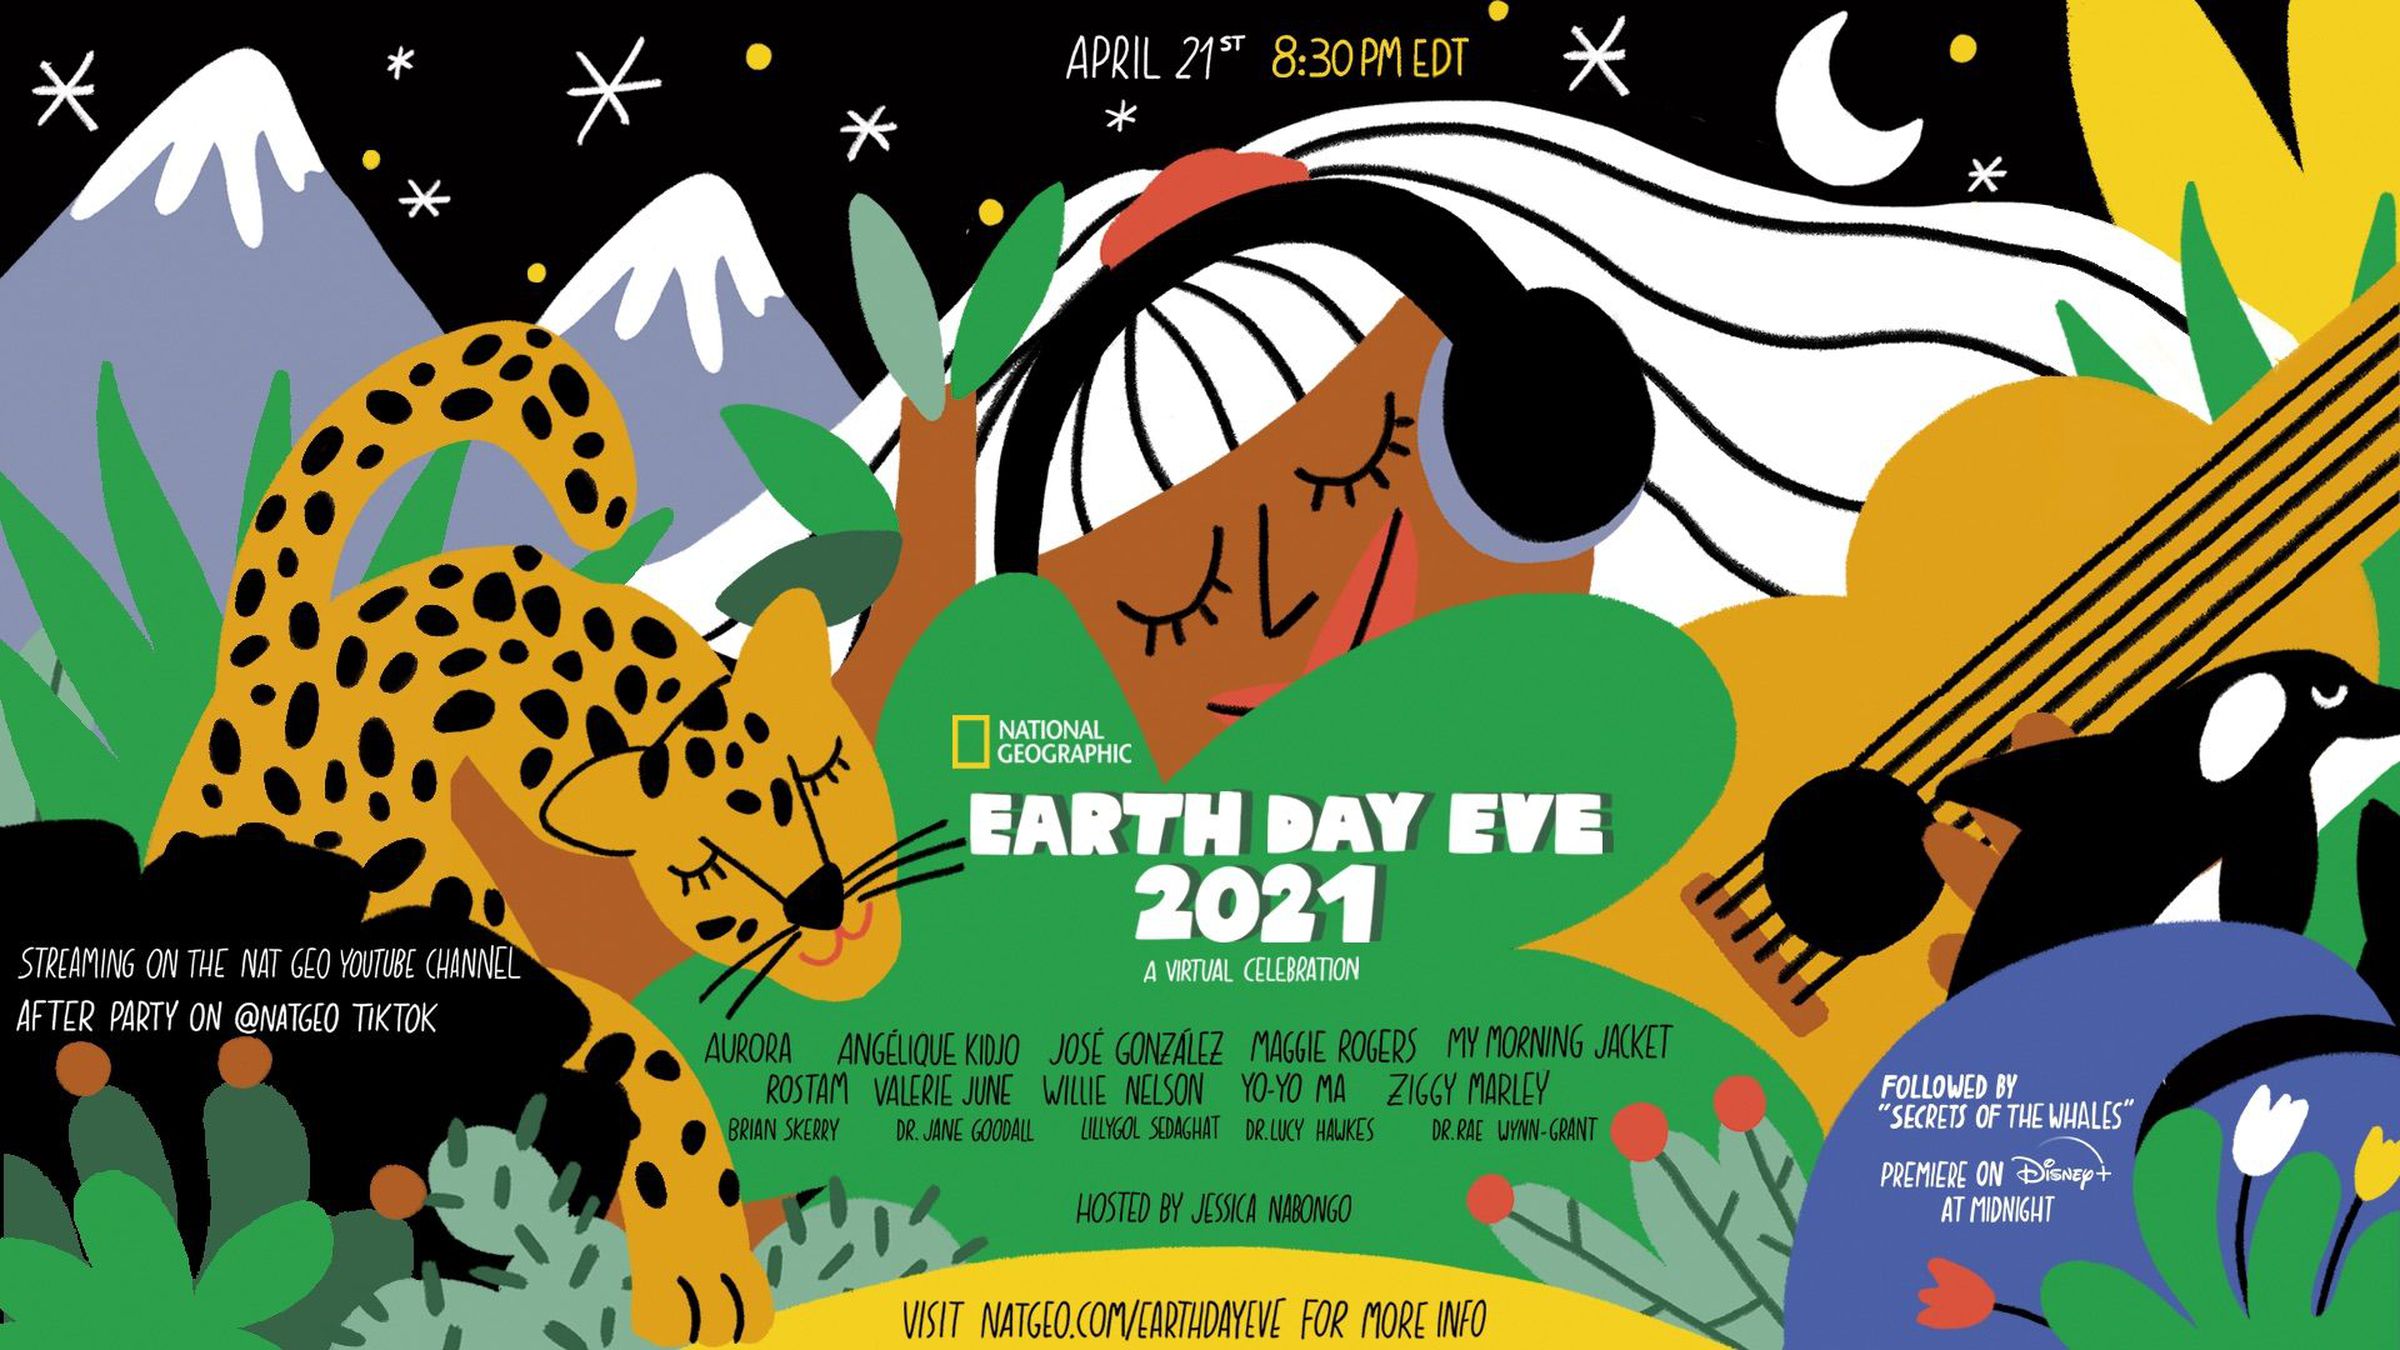 National Geographic’s Earth Day Eve 2021